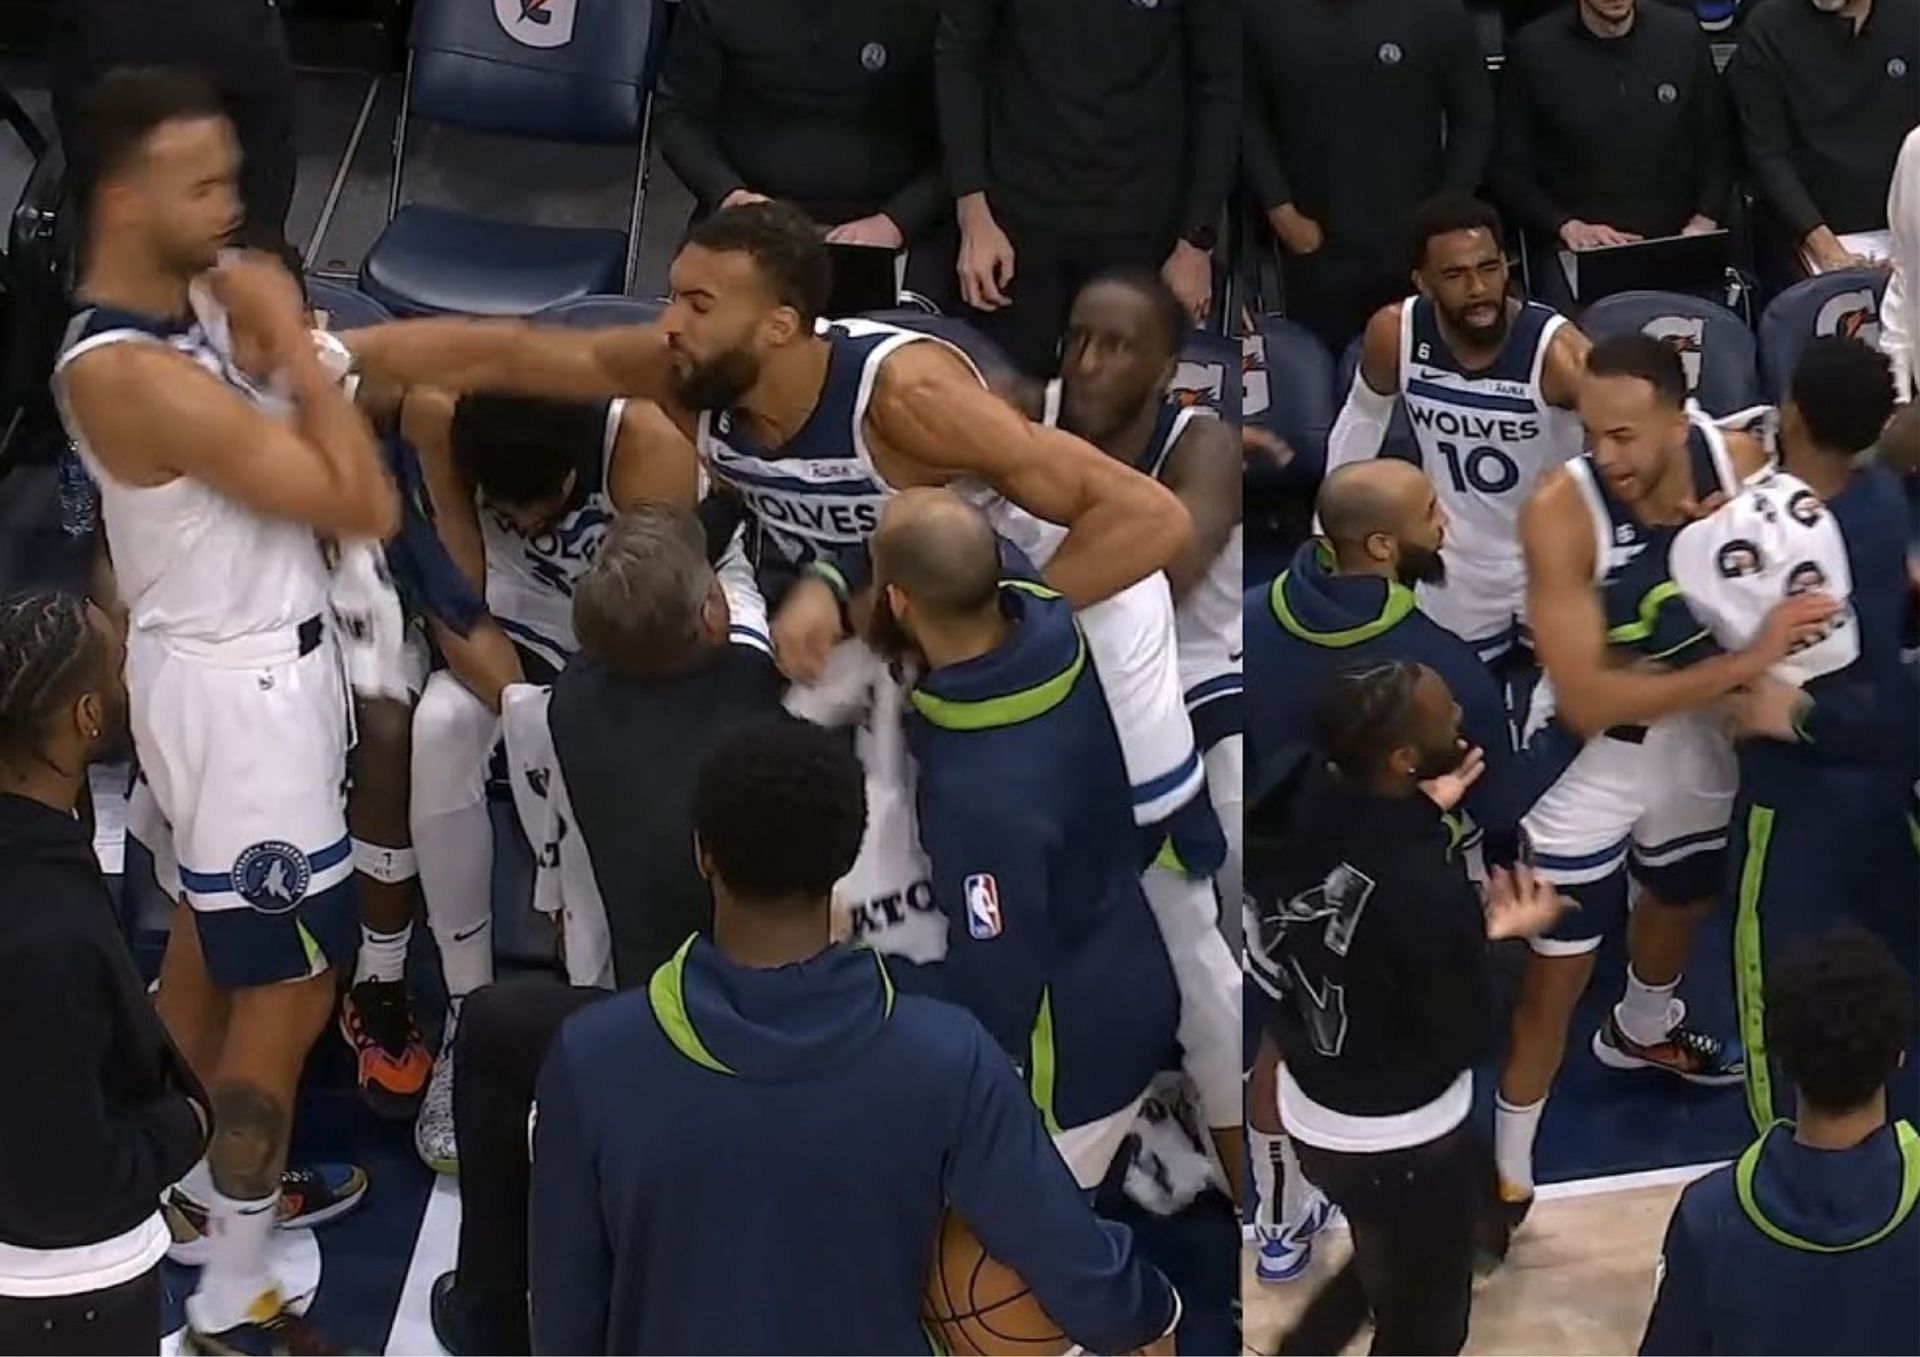 Rudy Gobert of the Minnesota Timberwolves punched his teammate Kyle Anderson in tonight